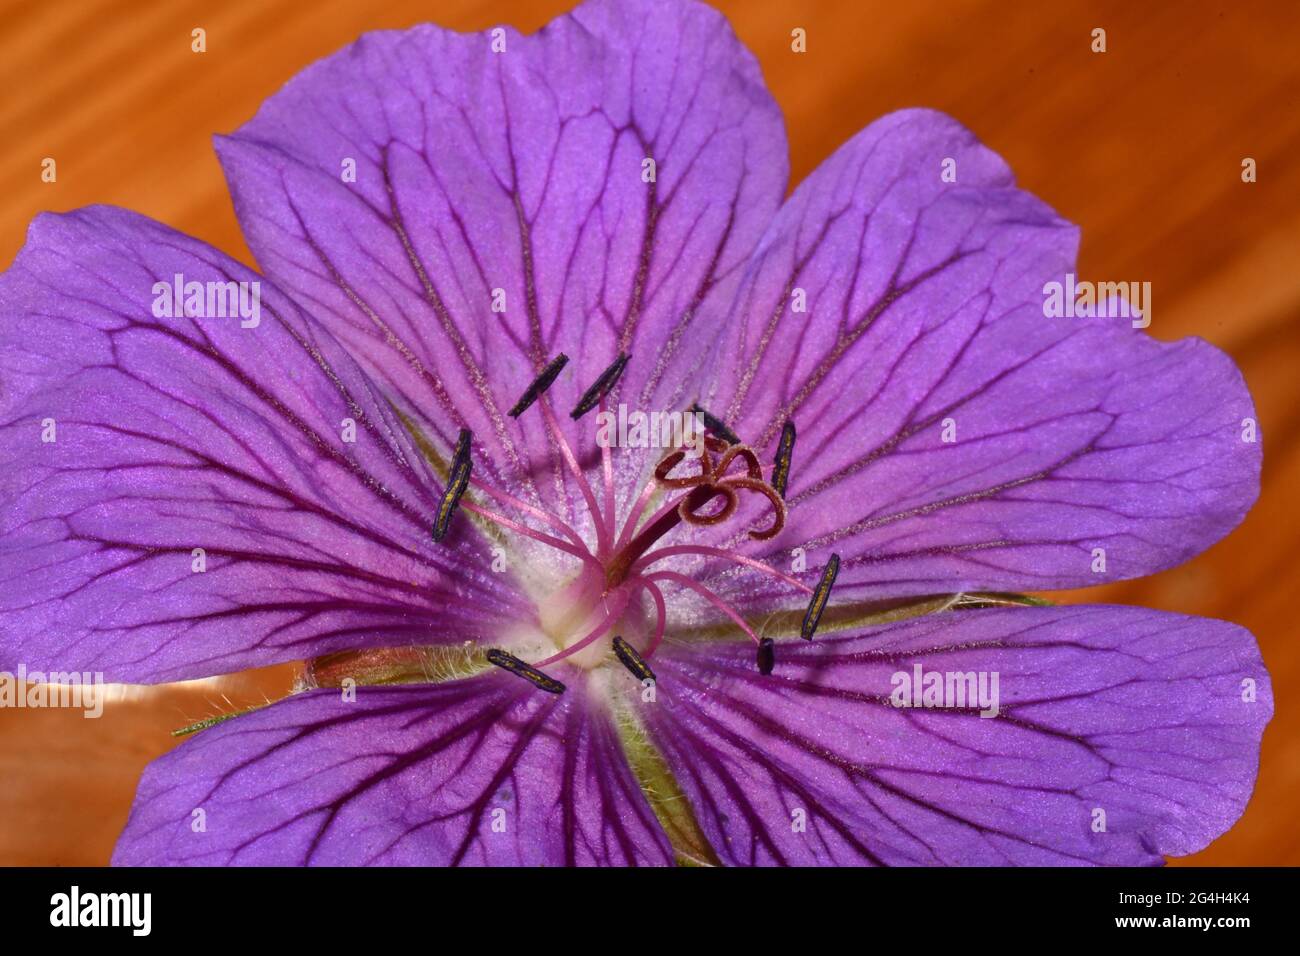 Geranium, cranesbill,close-up showing stamen around an ovary of merged carpels, with 5 style branches, purple petals,hardy perennial flowers. Stock Photo